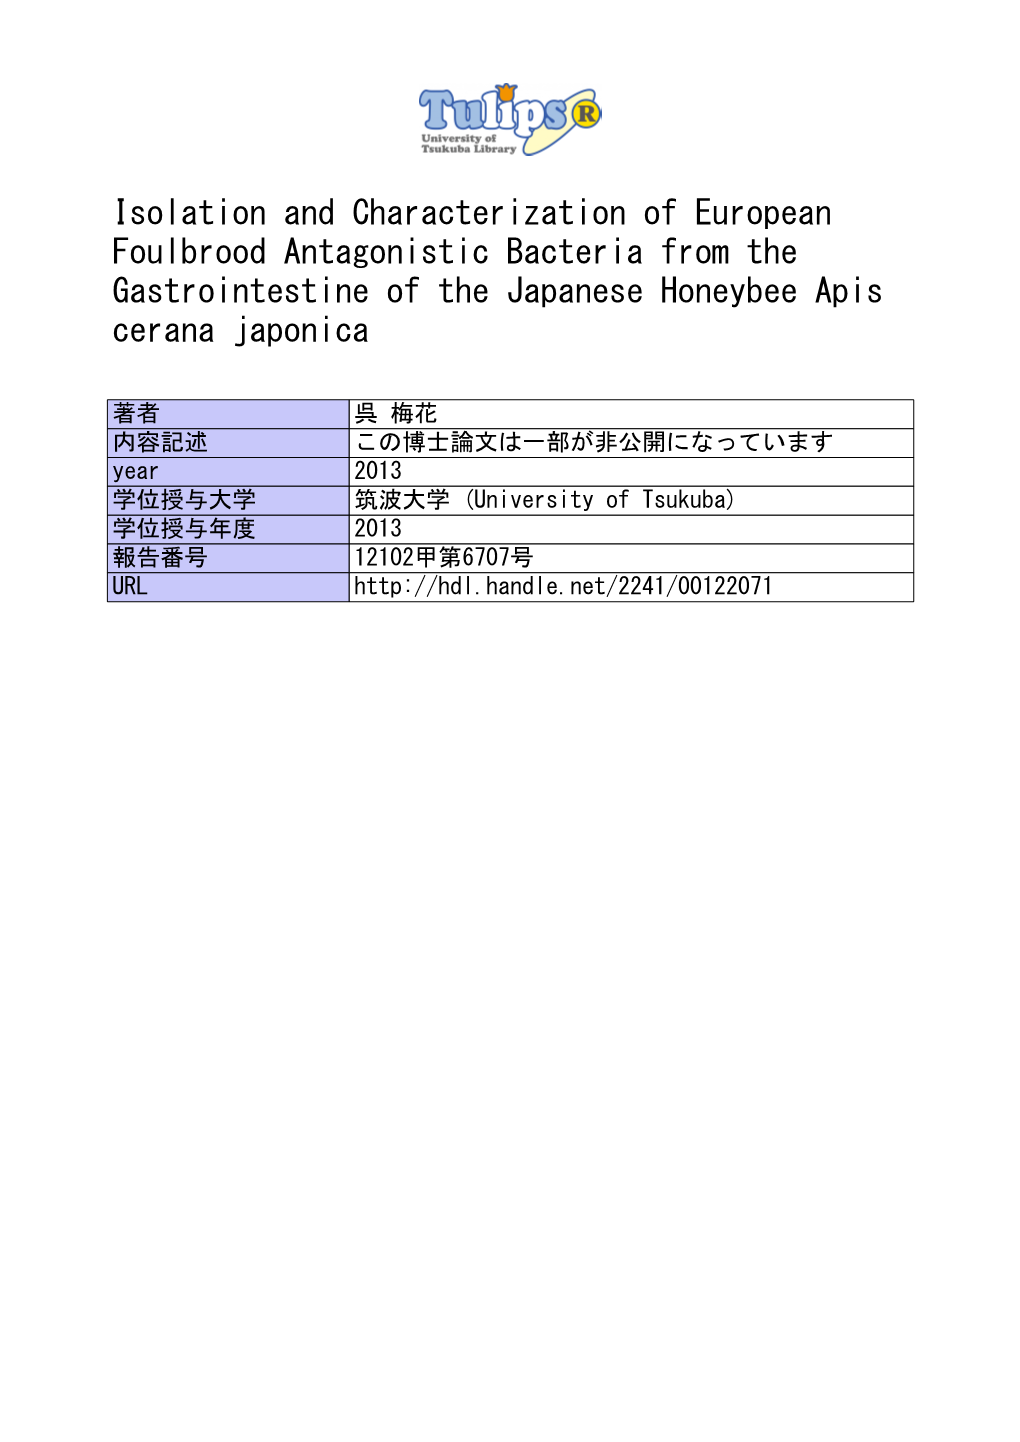 Isolation and Characterization of European Foulbrood Antagonistic Bacteria from the Gastrointestine of the Japanese Honeybee Apis Cerana Japonica